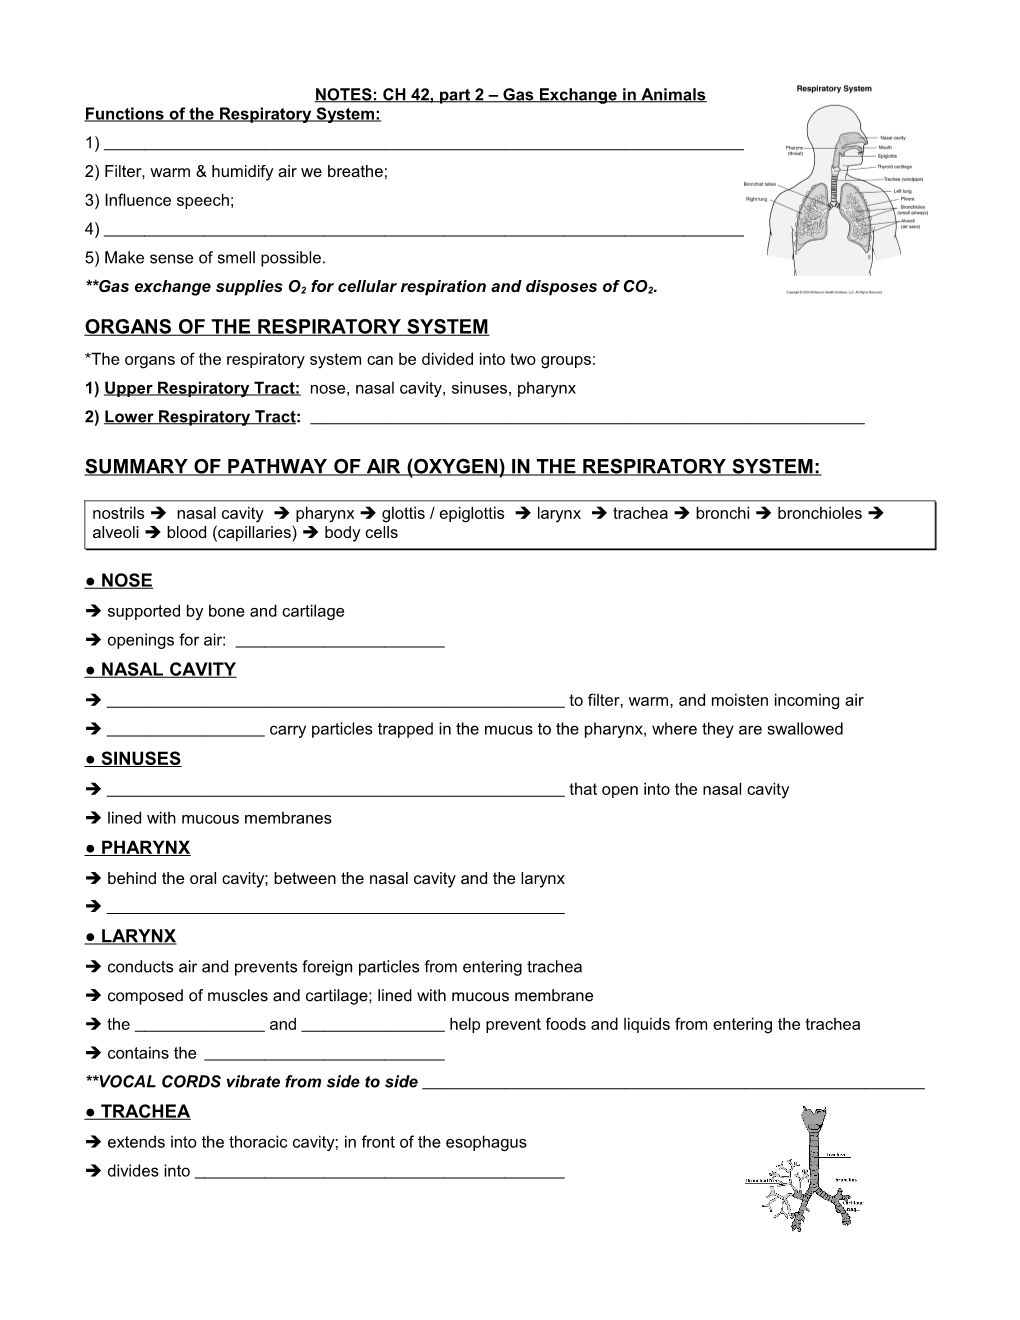 NOTES: Respiratory System(CH 16) Part 1 Organs of the Respiratory System